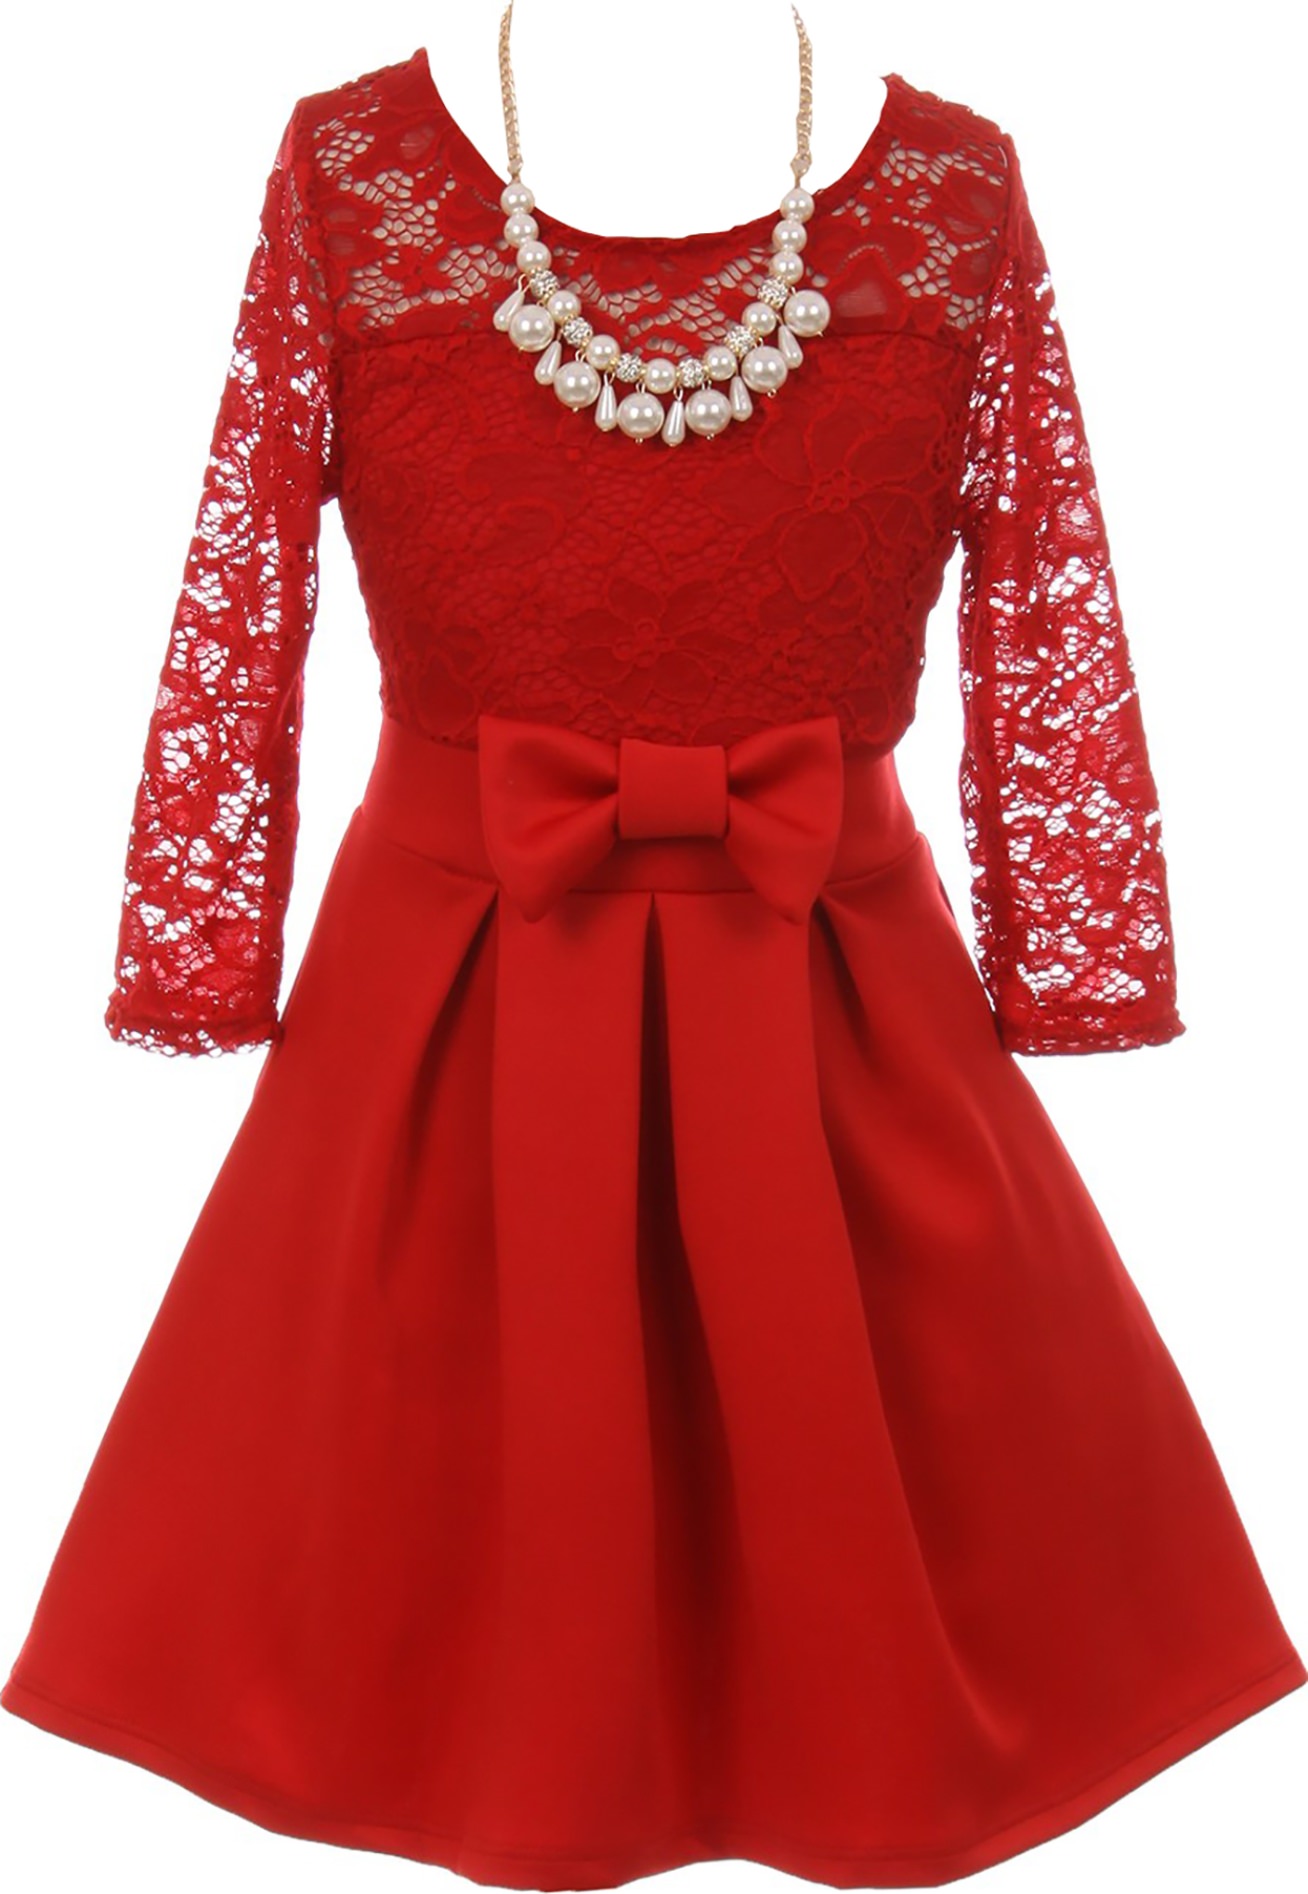 Little Girls Elegant Floral Lace Illusion Top Pearl Necklace Holiday Flower Girl Dress Red 4 (2J1K0S4) - image 1 of 4